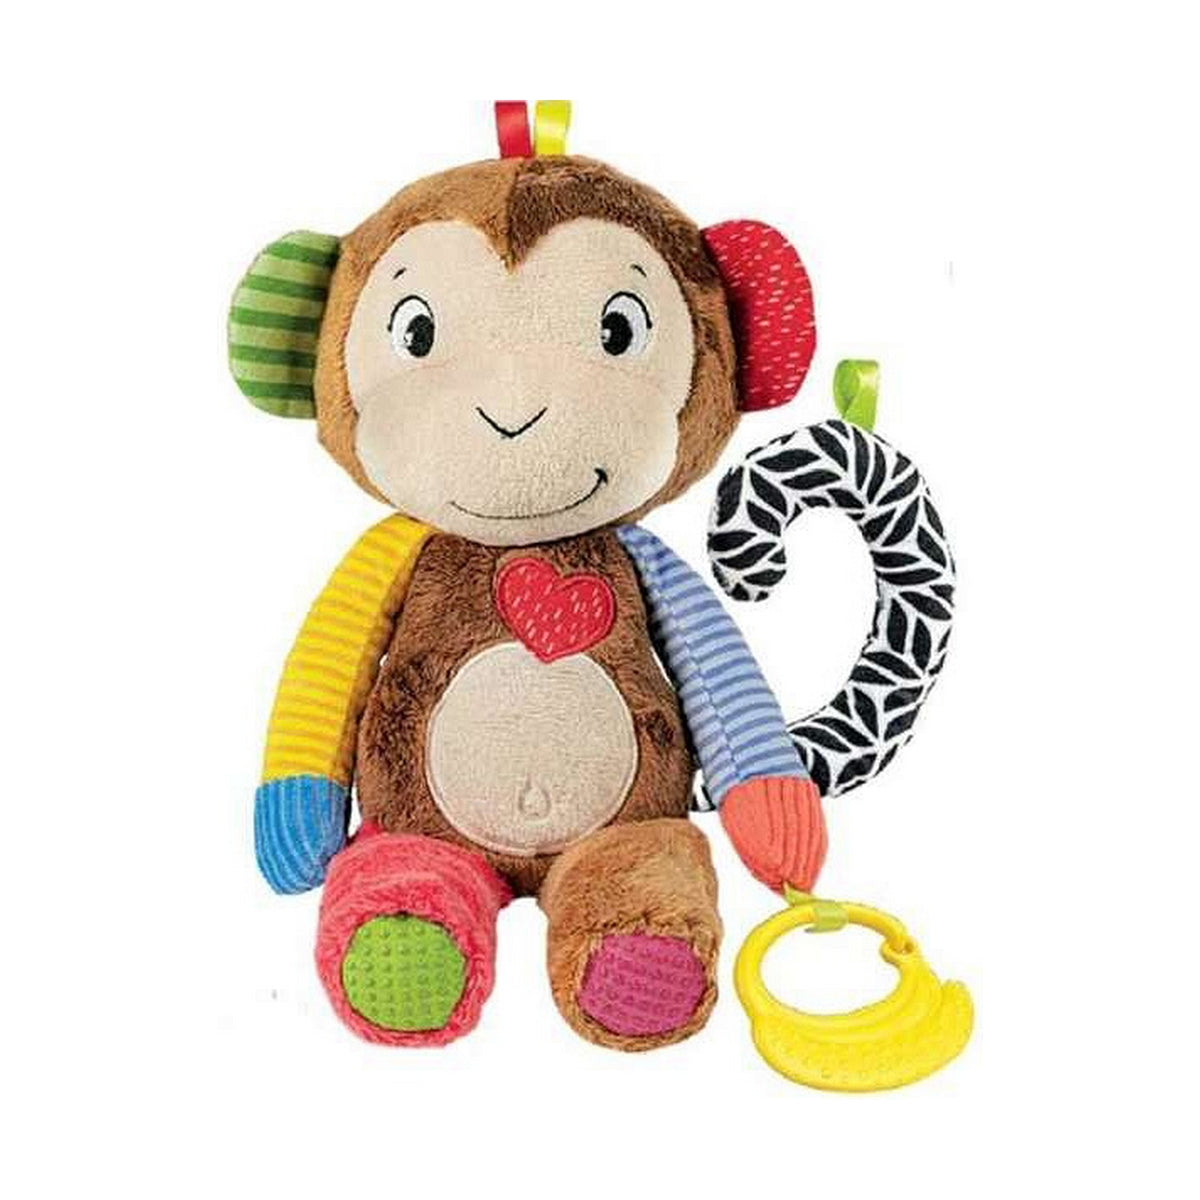 Fluffy toy Clementoni 61355 - Little Baby Shop